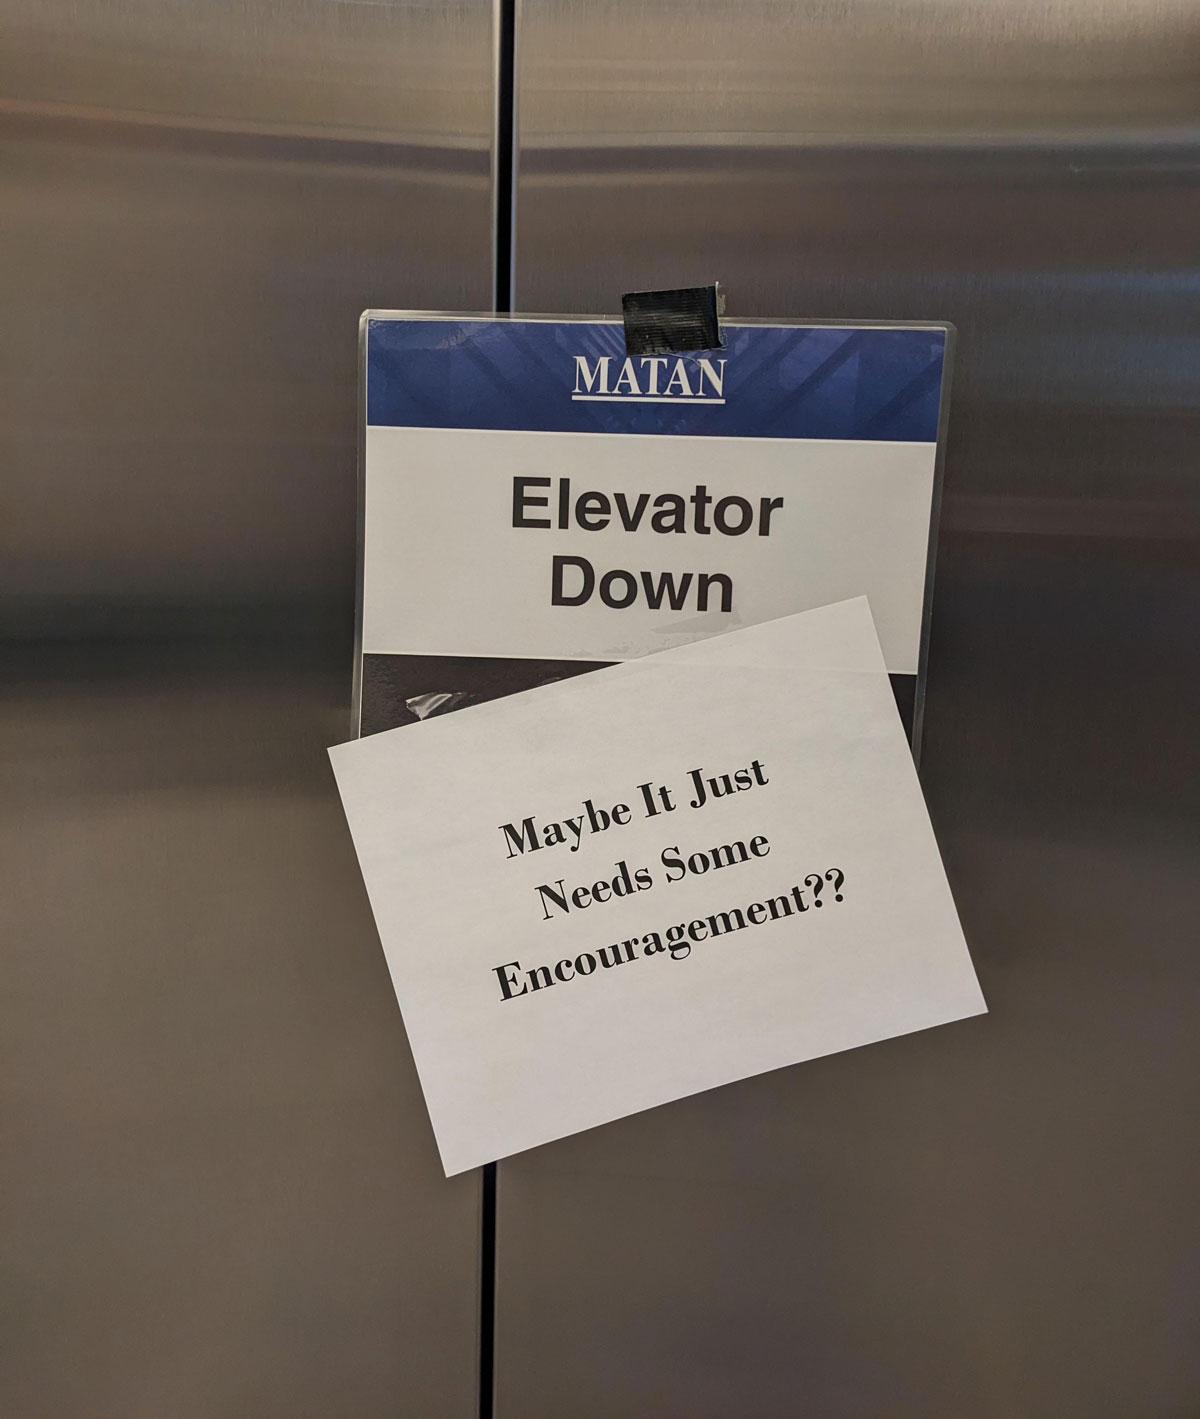 Elevators will experience many ups and downs in their lifetime